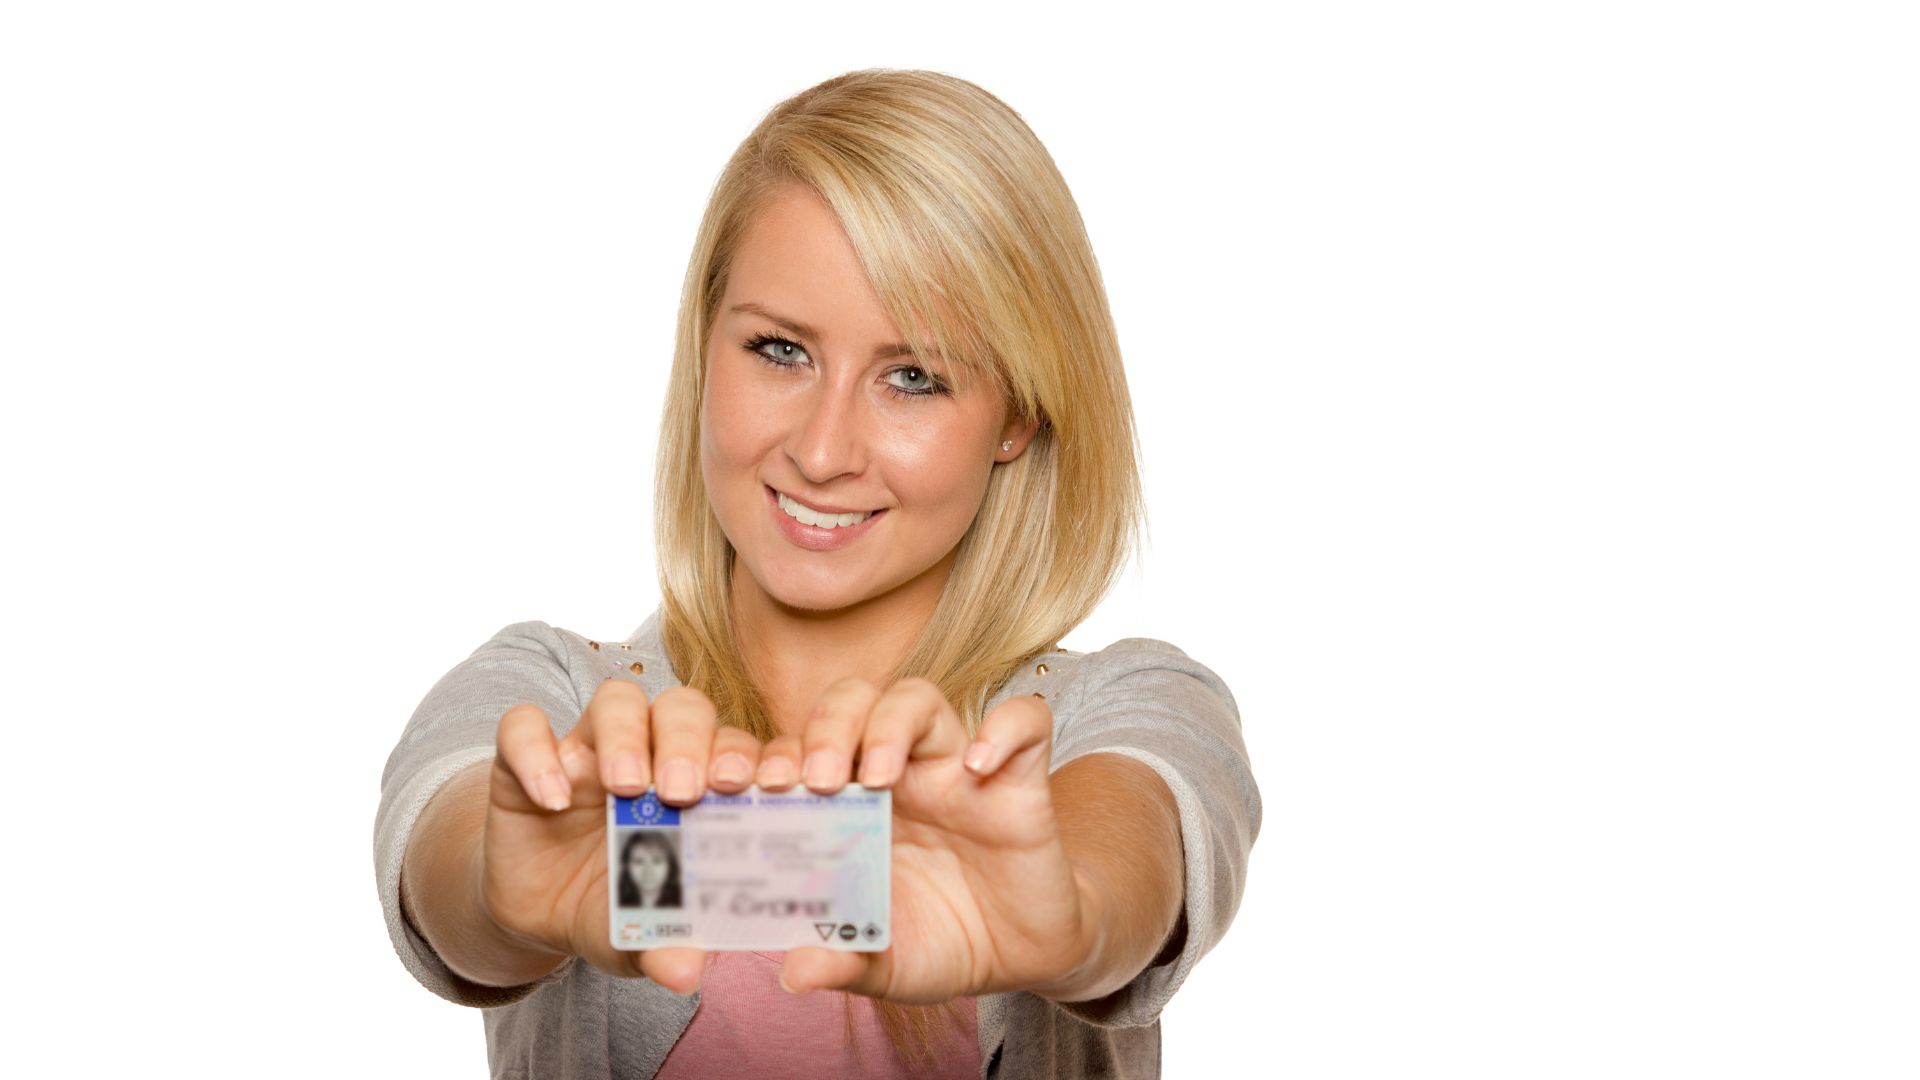 How to Find California Driver’s License Number